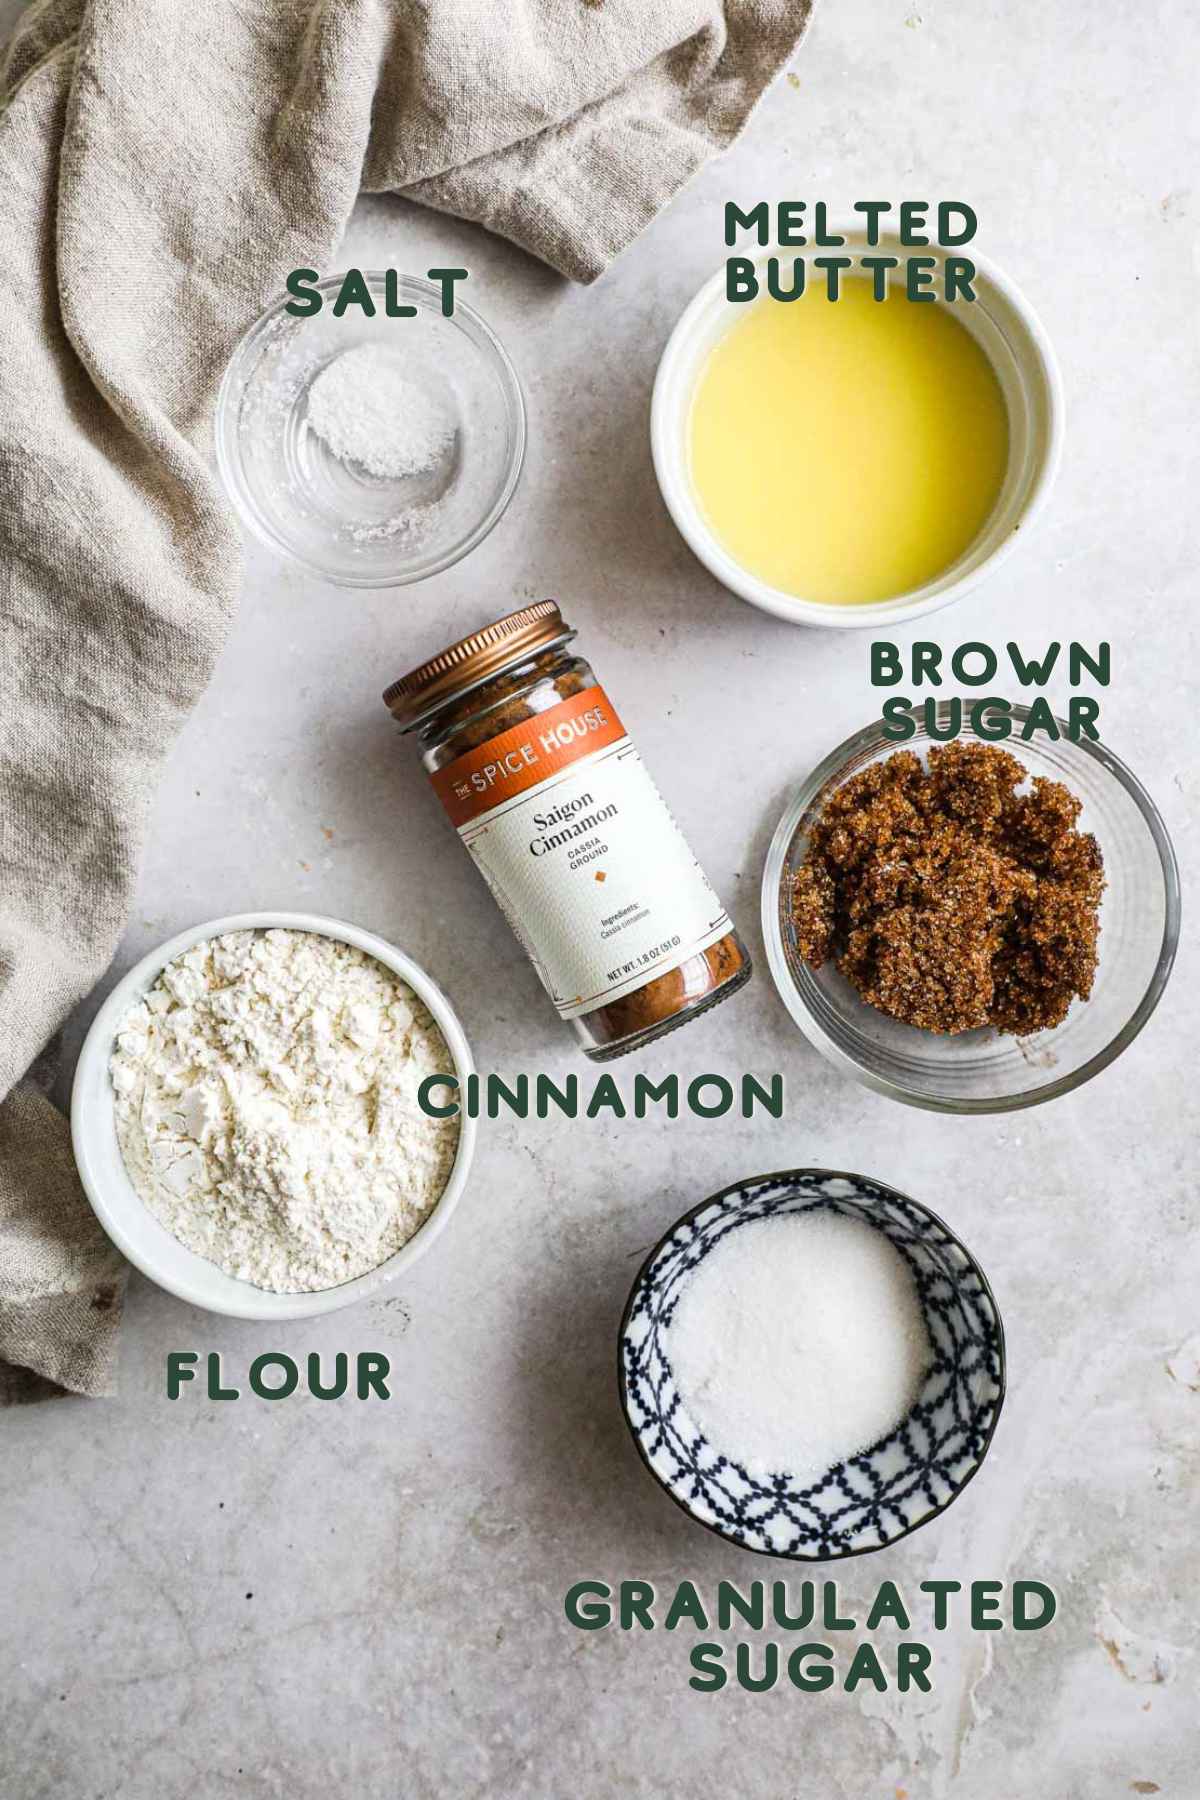 Ingredients to make easy butter streusel crumb topping, including salt, melted butter, cinnamon, brown sugar, granulated sugar, and flour.